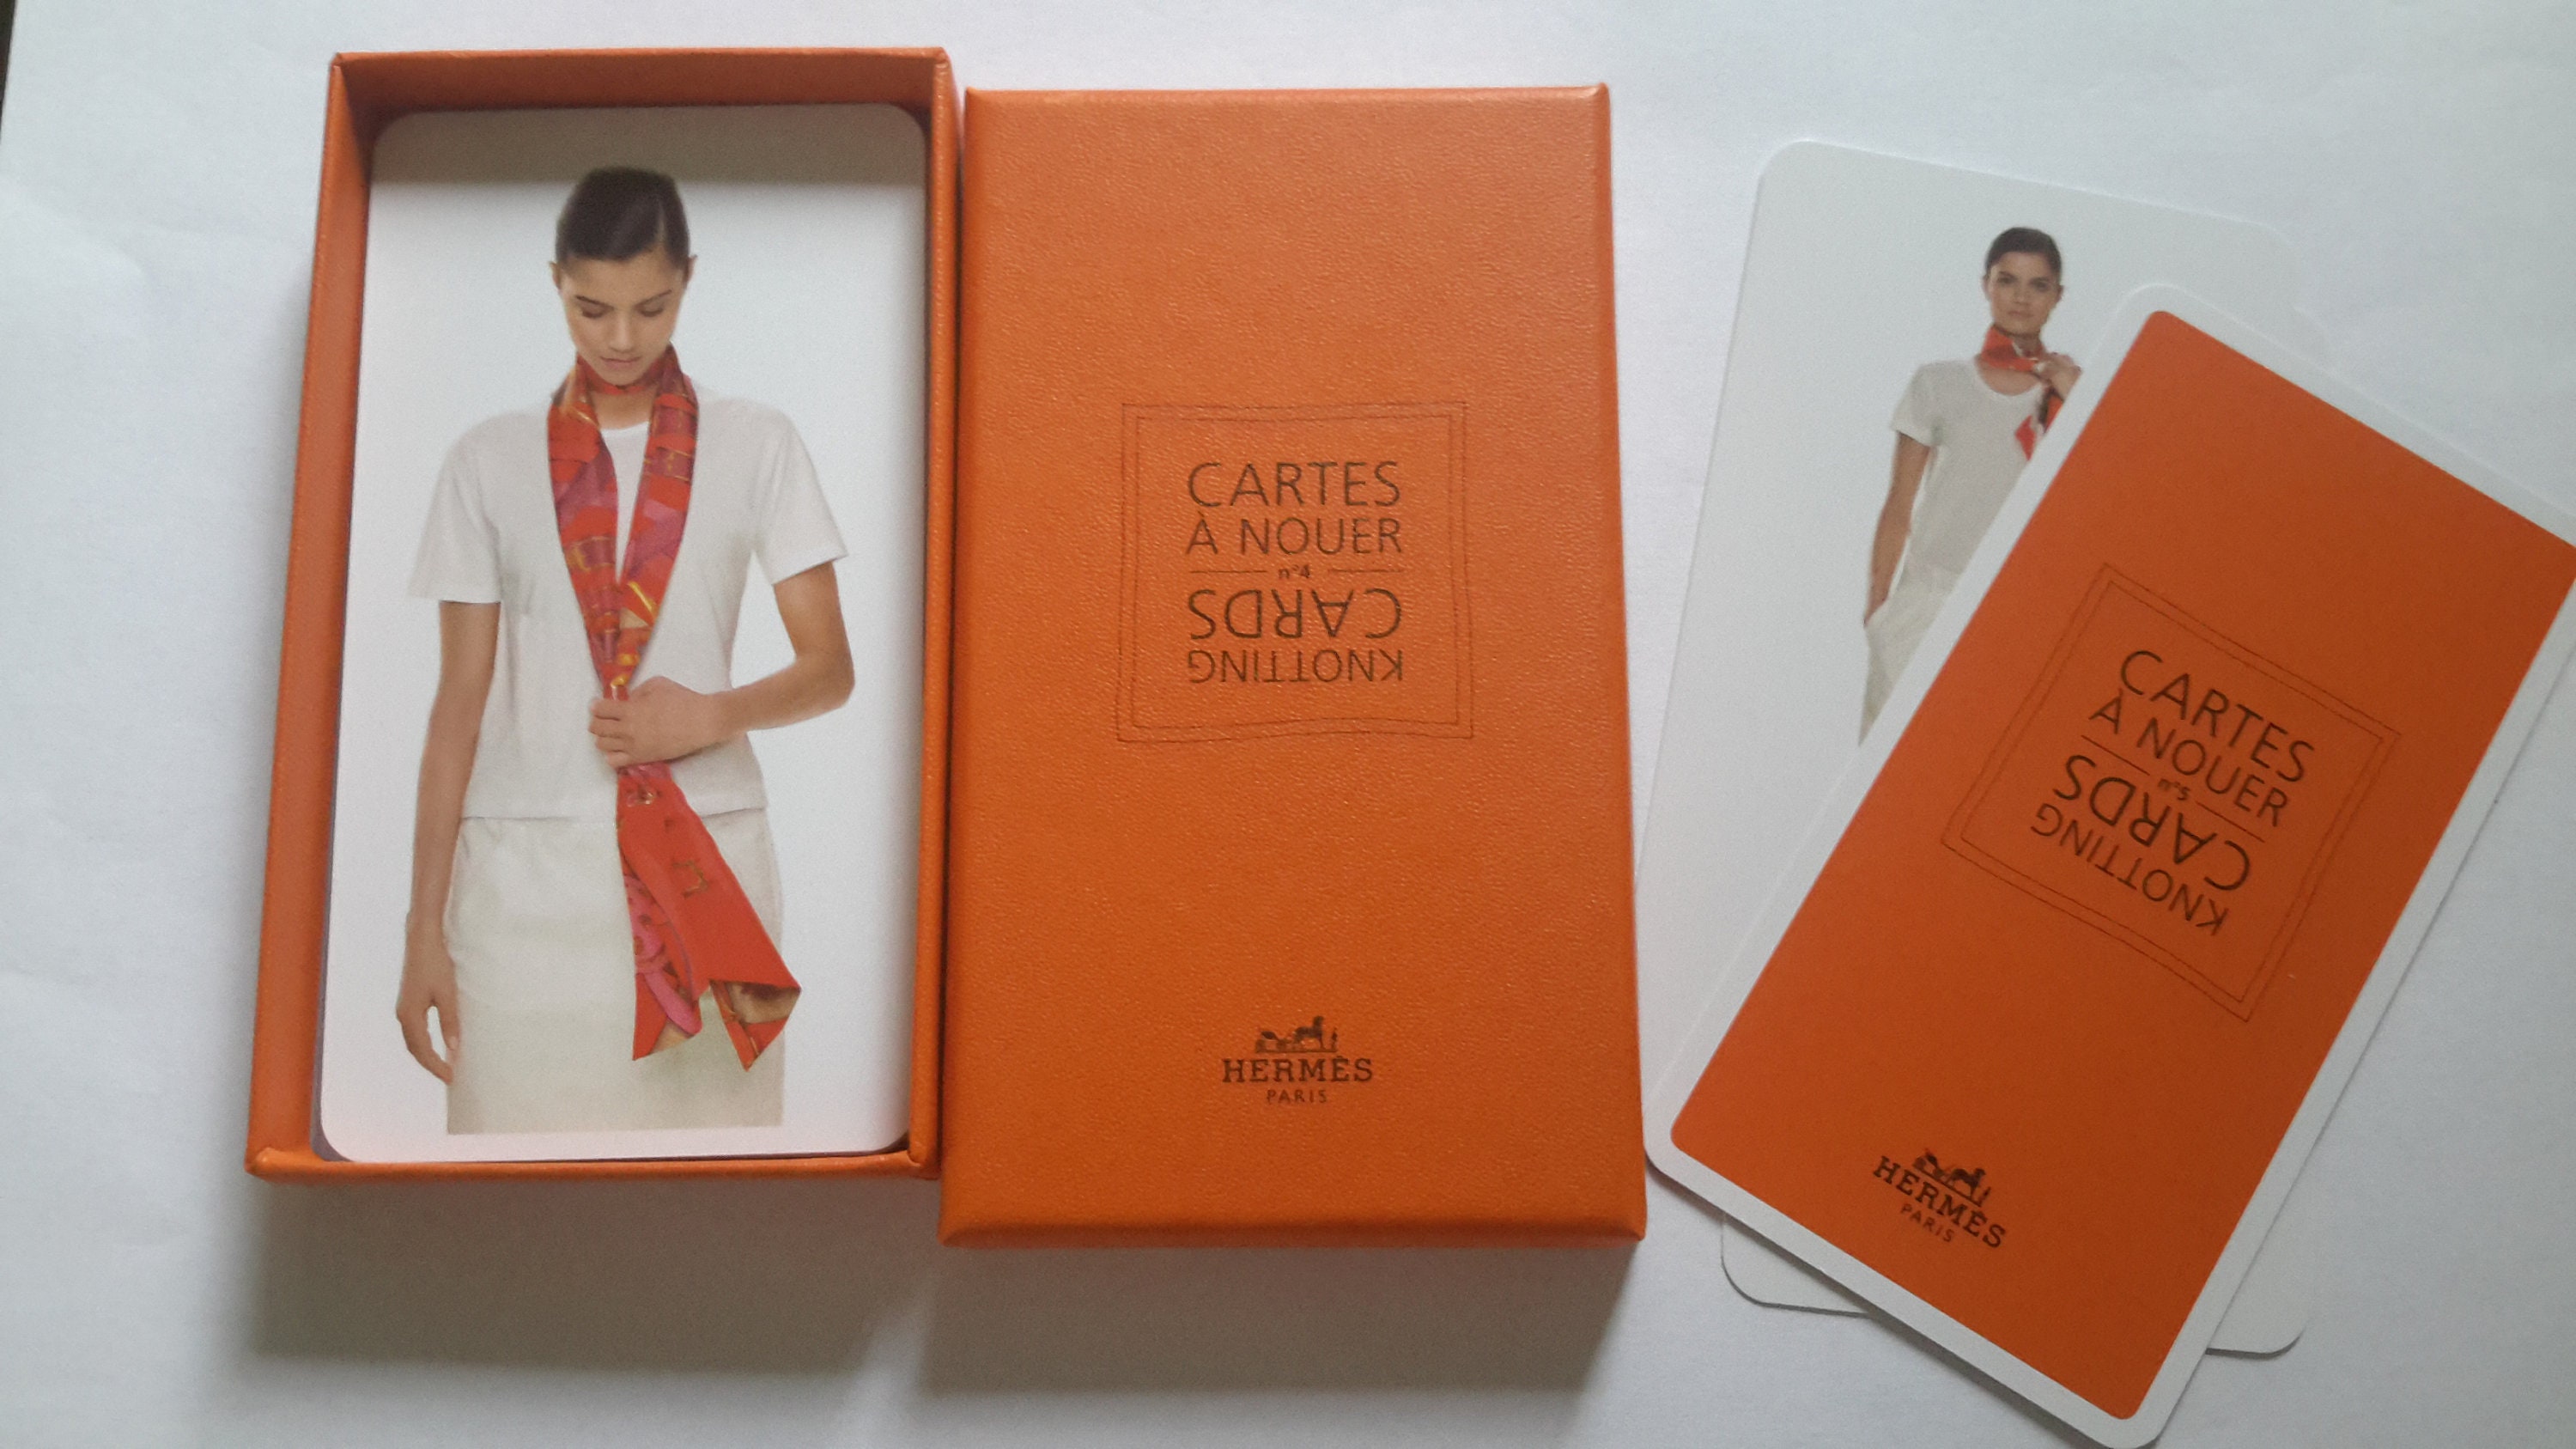 Hermes Business Cards